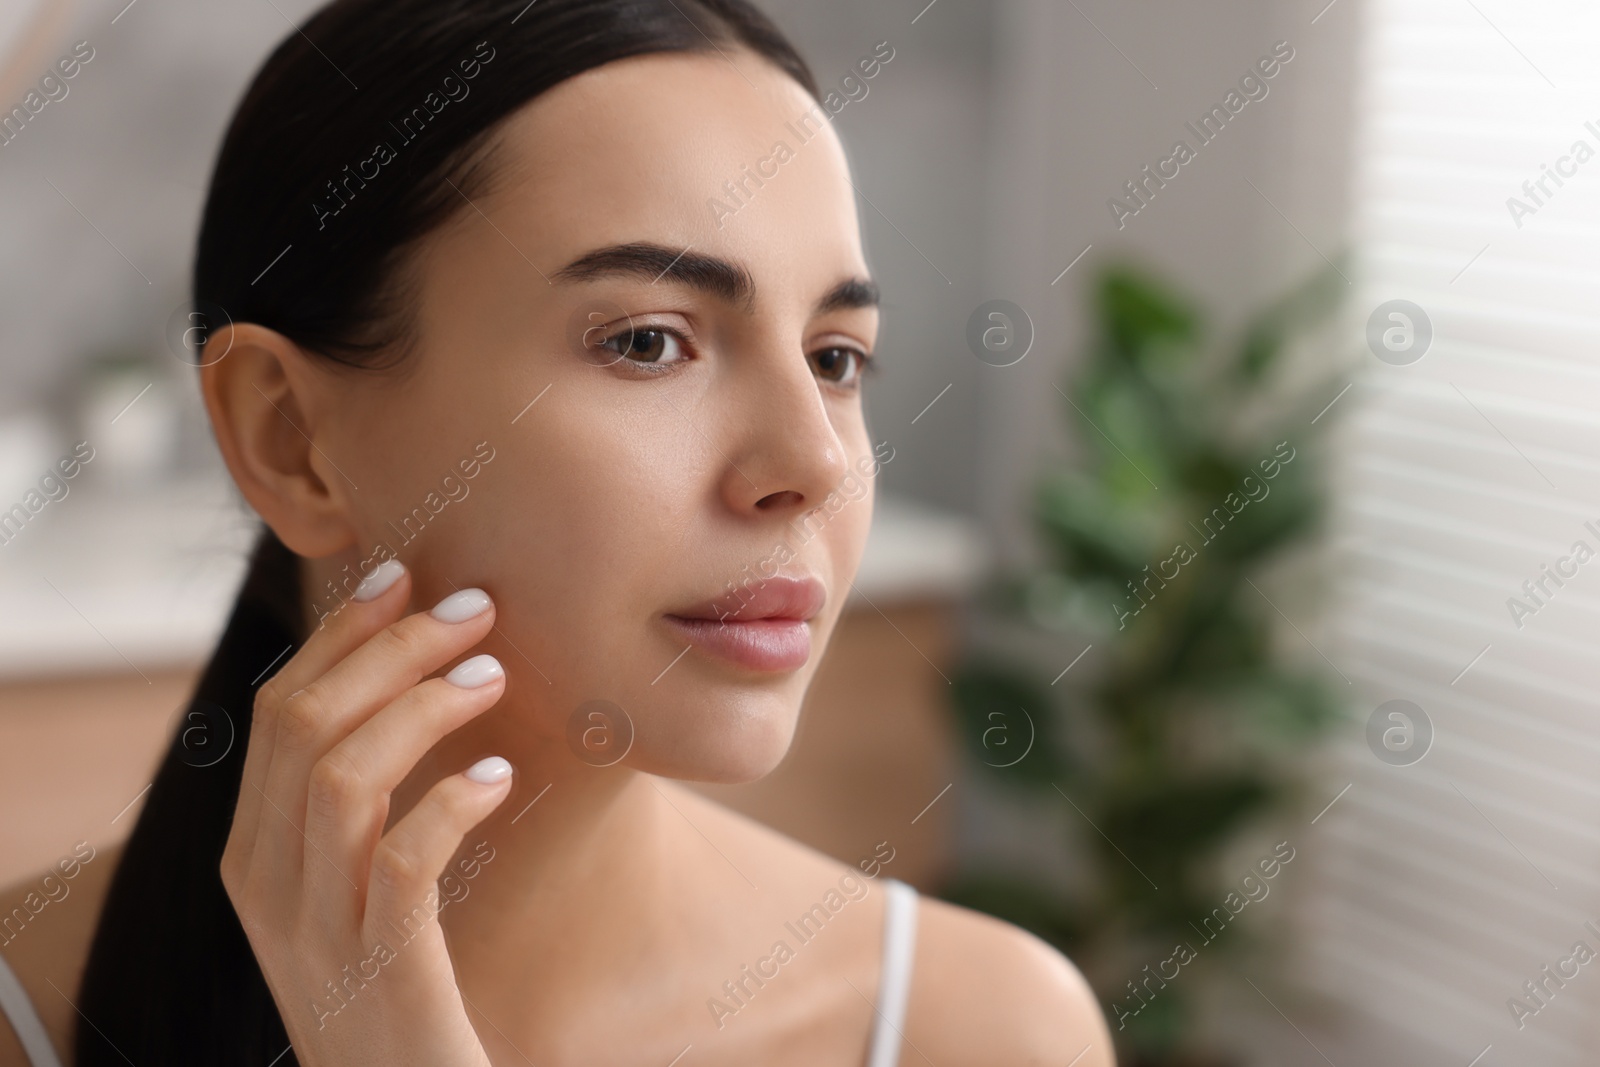 Photo of Woman with dry skin checking her face near mirror indoors, space for text